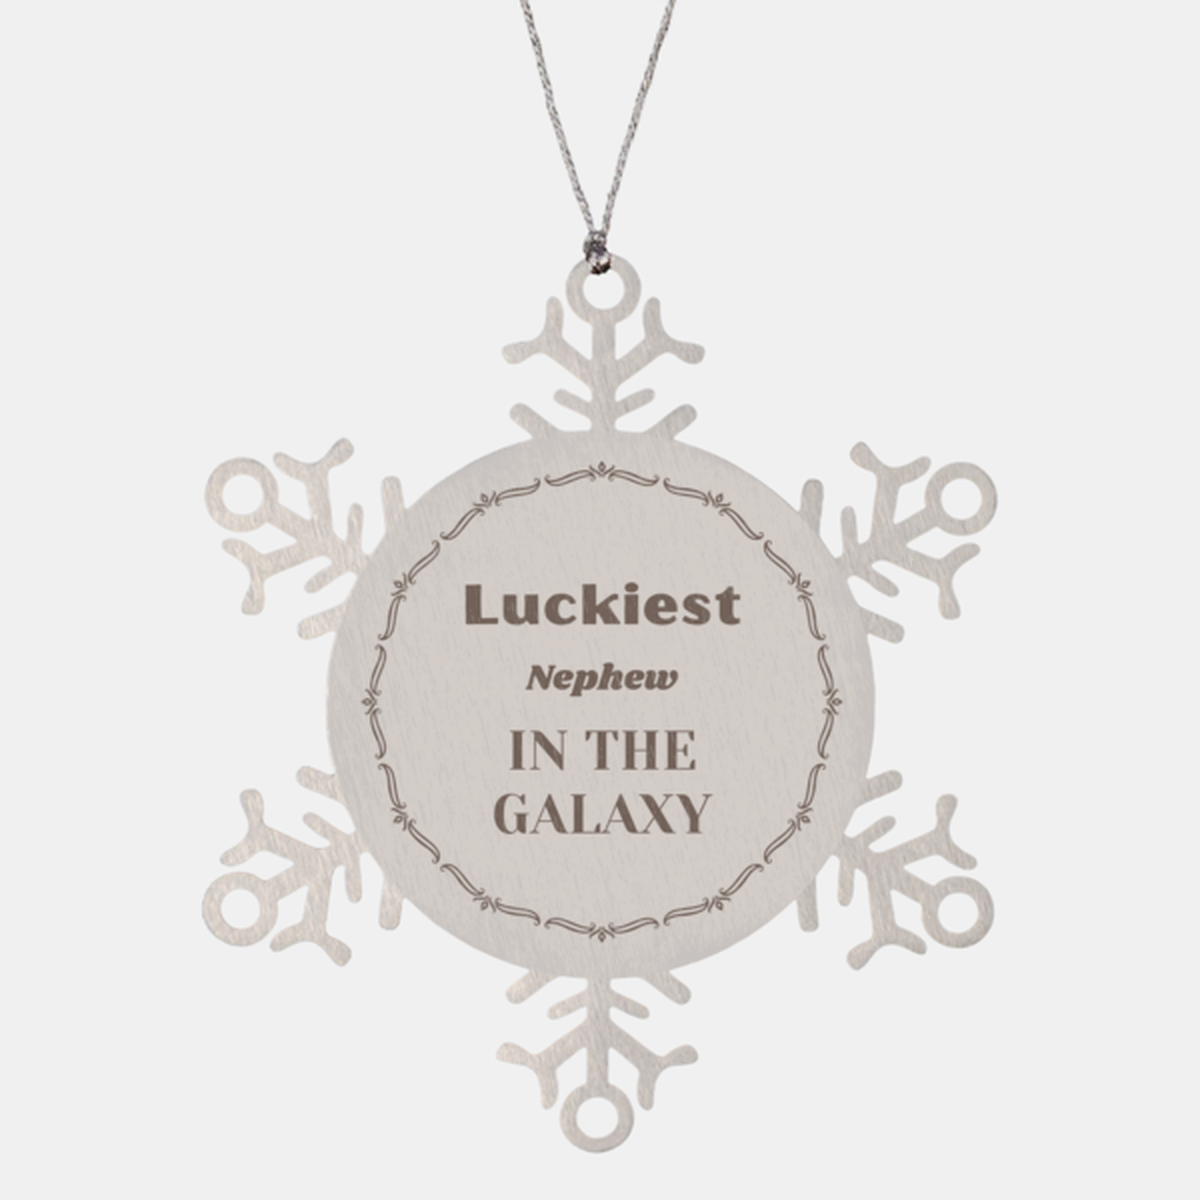 Luckiest Nephew in the Galaxy, To My Nephew Ornament Gifts, Christmas Nephew Snowflake Ornament Gifts, X-mas Decorations Unique Gifts For Nephew Men Women